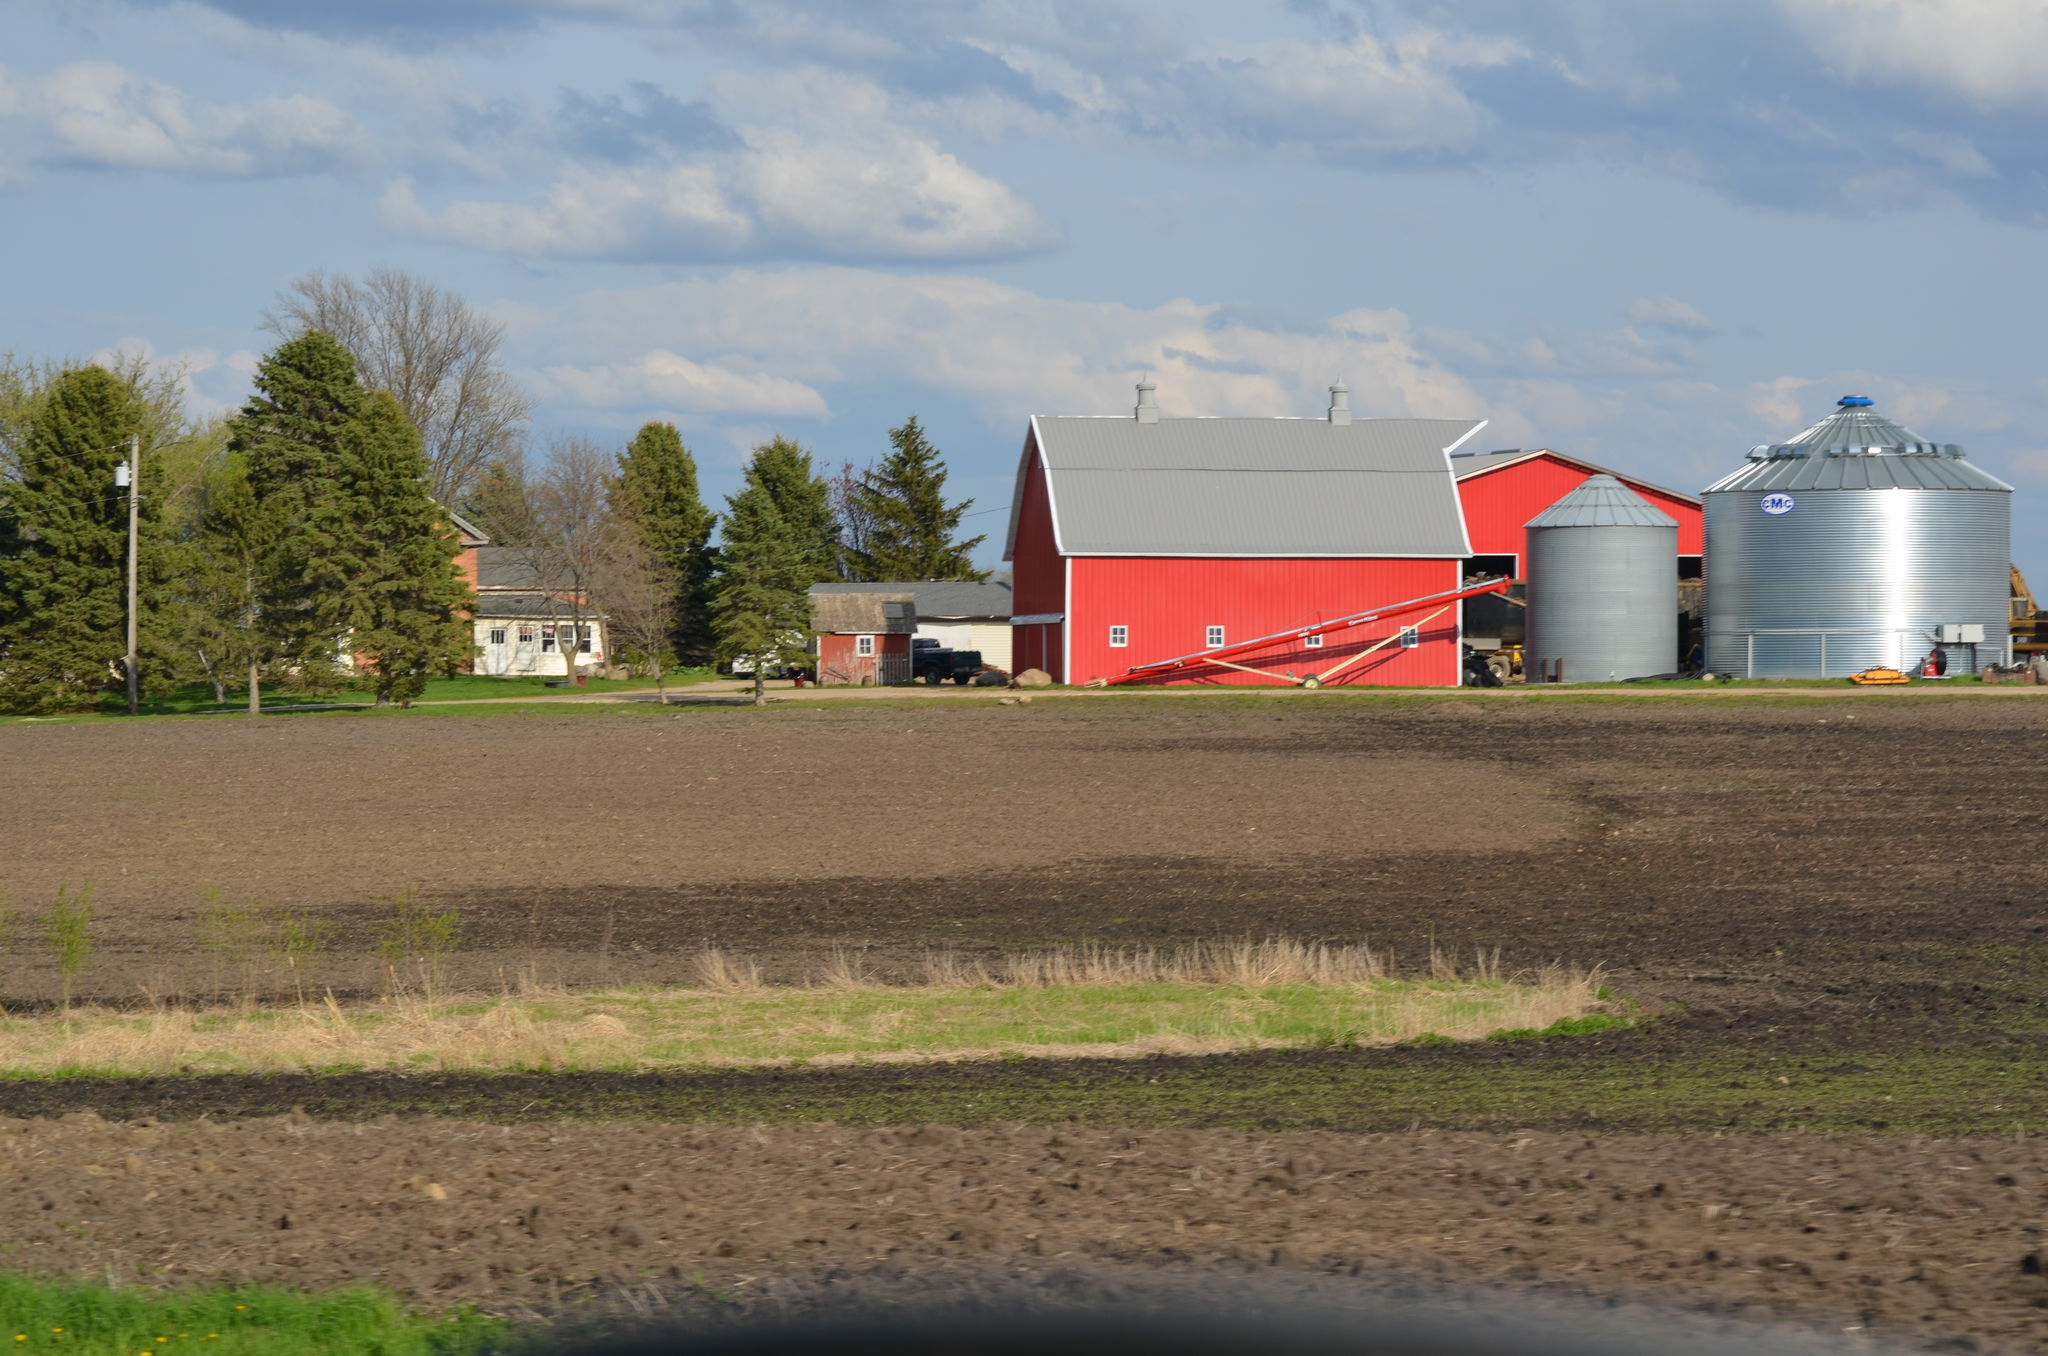 Farmstead with red barn and silos.